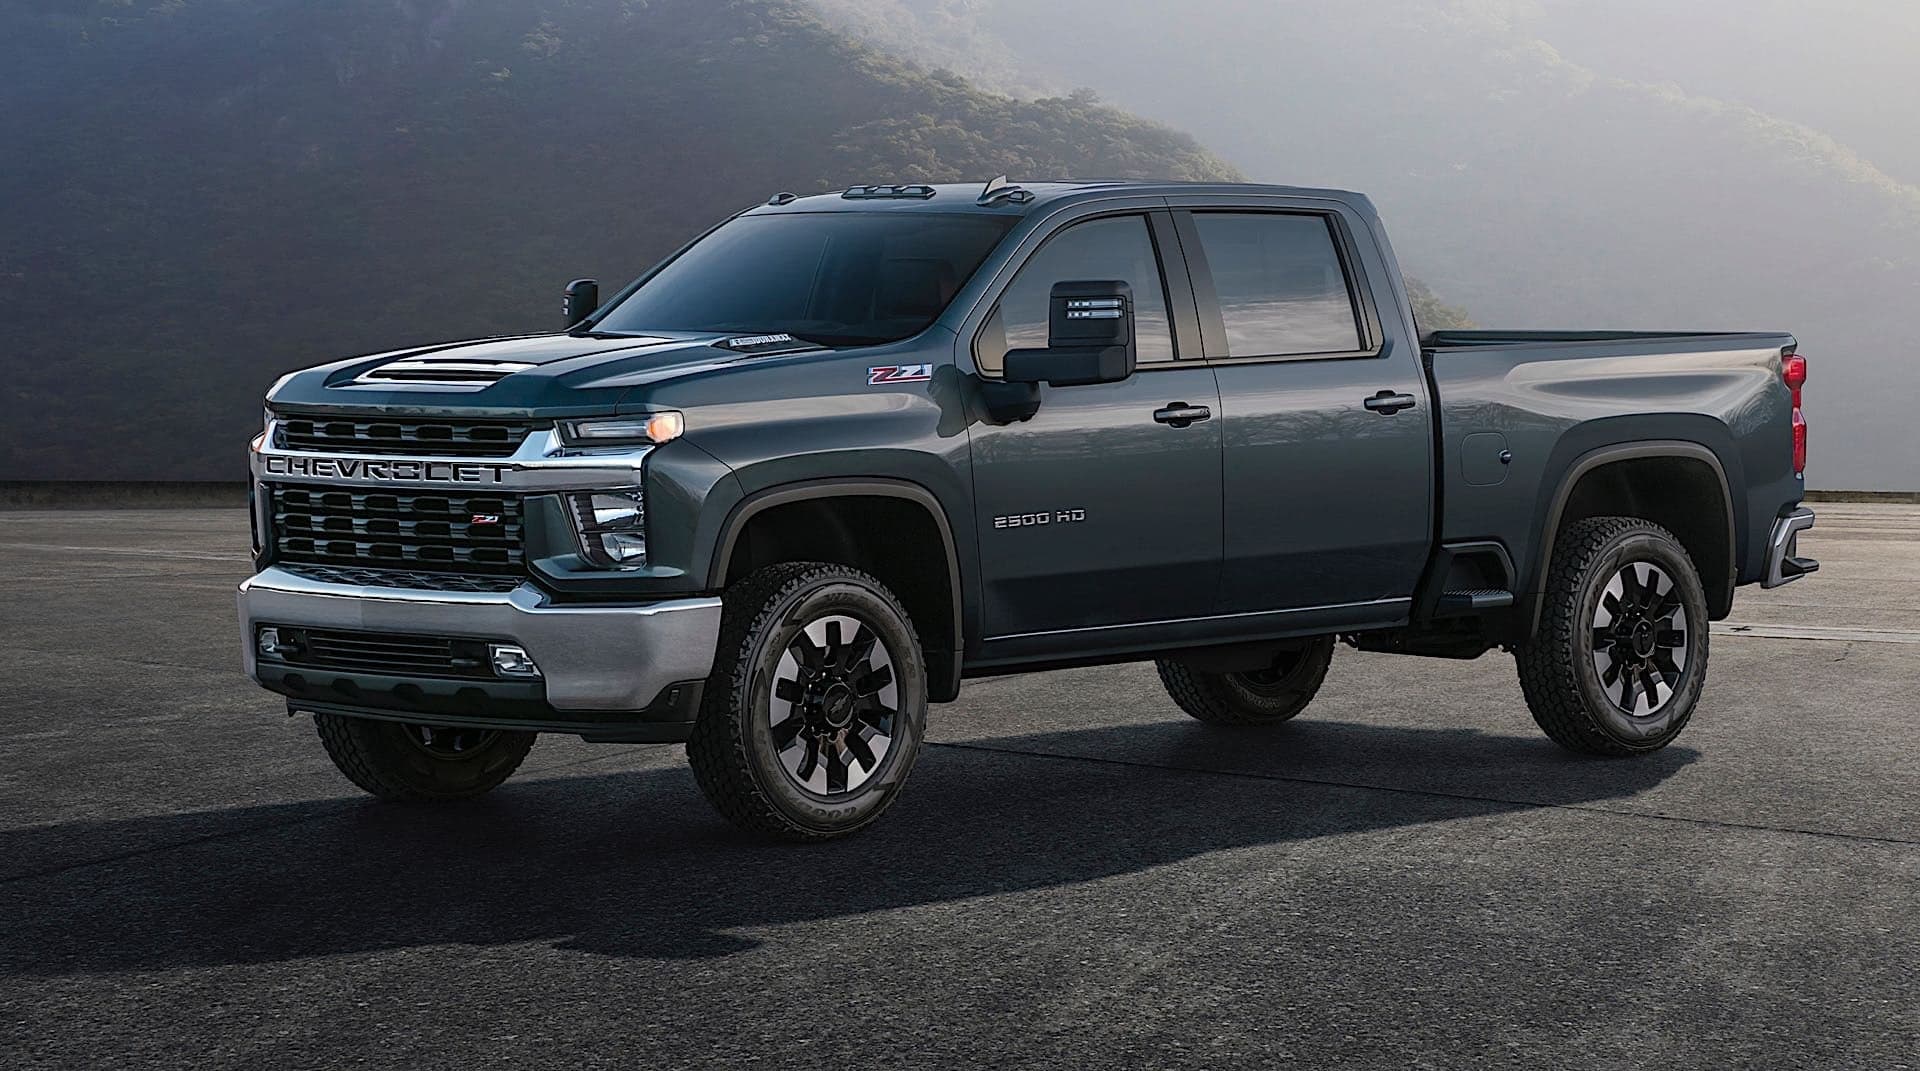 2020 Chevrolet Silverado HD Teased With First Images and Diesel Specs